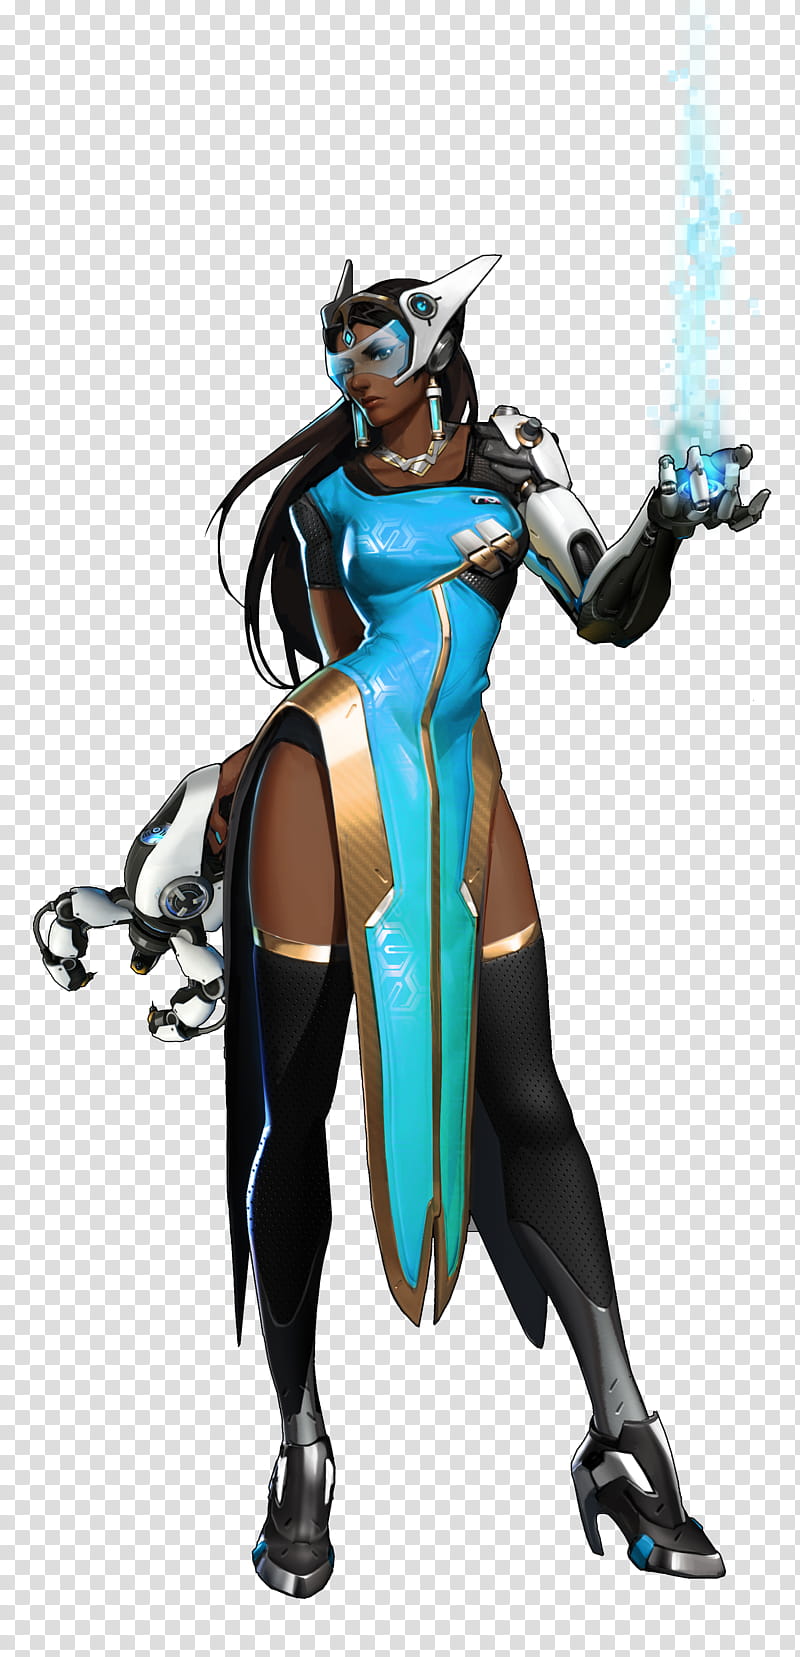 Symmetra Overwatch, female anime character transparent background PNG clipart